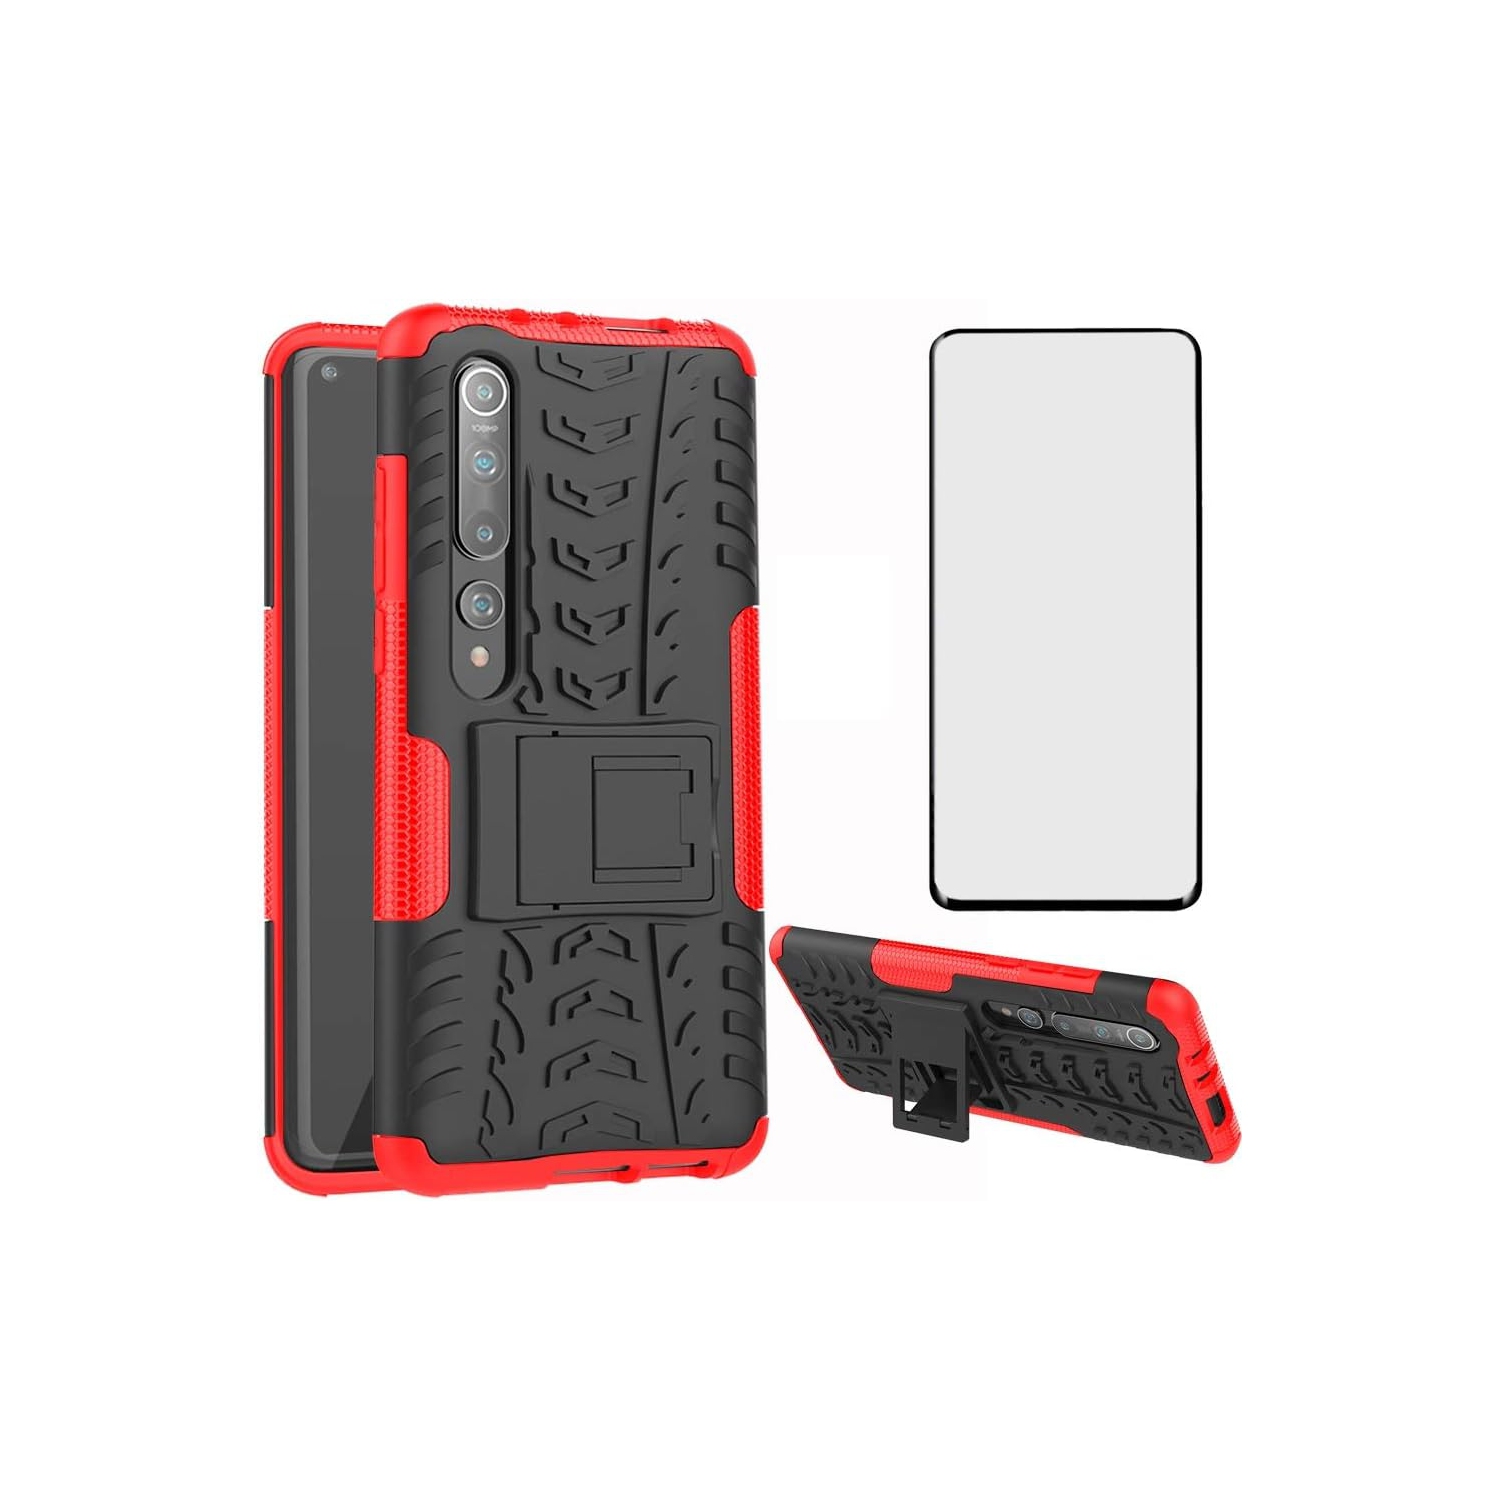 Phone Case for Xiaomi Mi 10/Mi10 Pro with Tempered Glass Screen Protector Cover and Stand Kickstand Hard Rugged Hybrid